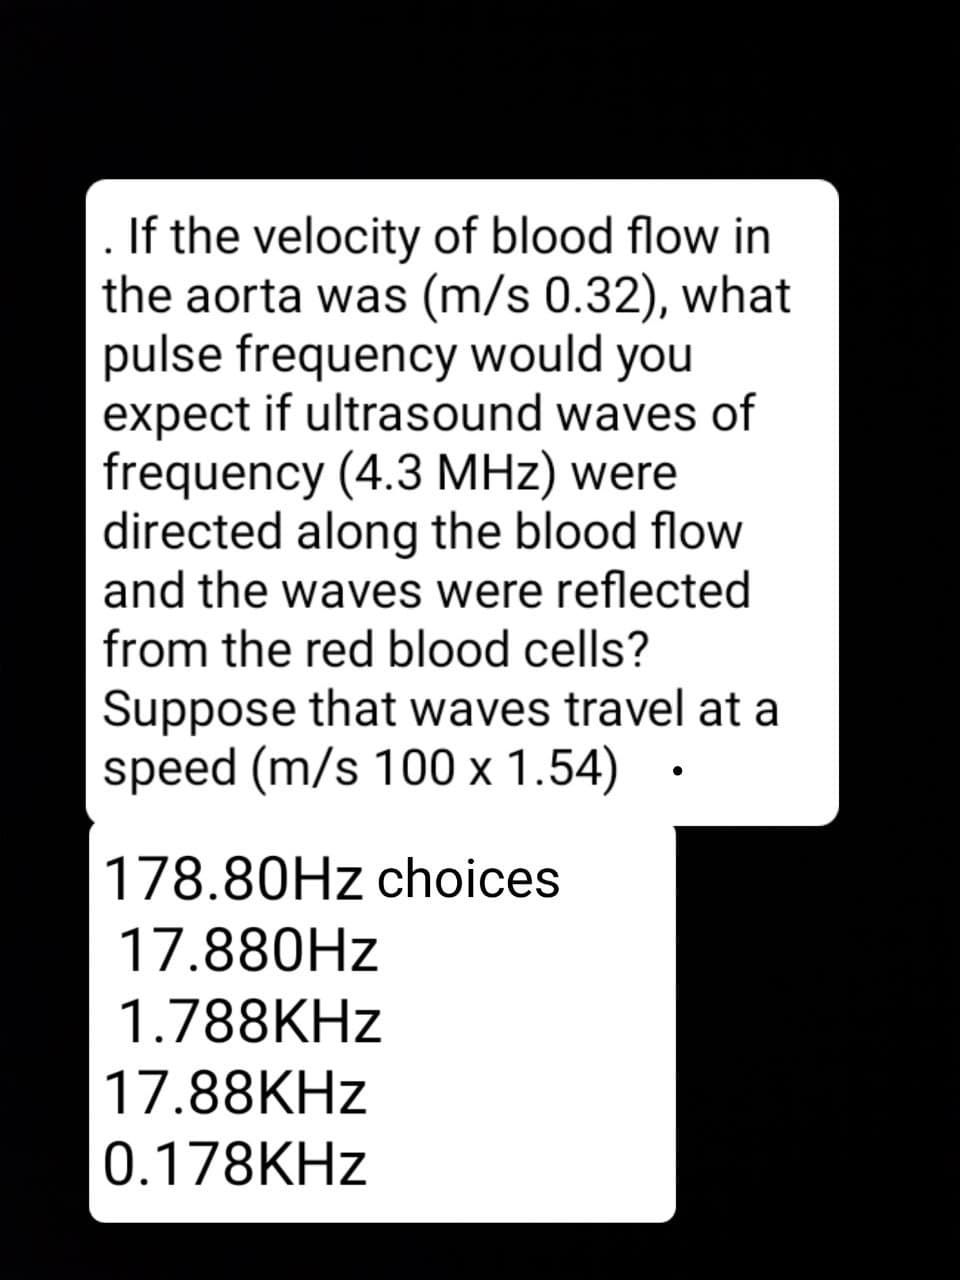 If the velocity of blood flow in
the aorta was (m/s 0.32), what
pulse frequency would you
expect if ultrasound waves of
frequency (4.3 MHz) were
directed along the blood flow
and the waves were reflected
from the red blood cells?
Suppose that waves travel at a
speed (m/s 100 x 1.54) •
178.80HZ choices
17.880HZ
1.788KHZ
17.88KHZ
0.178KHZ
